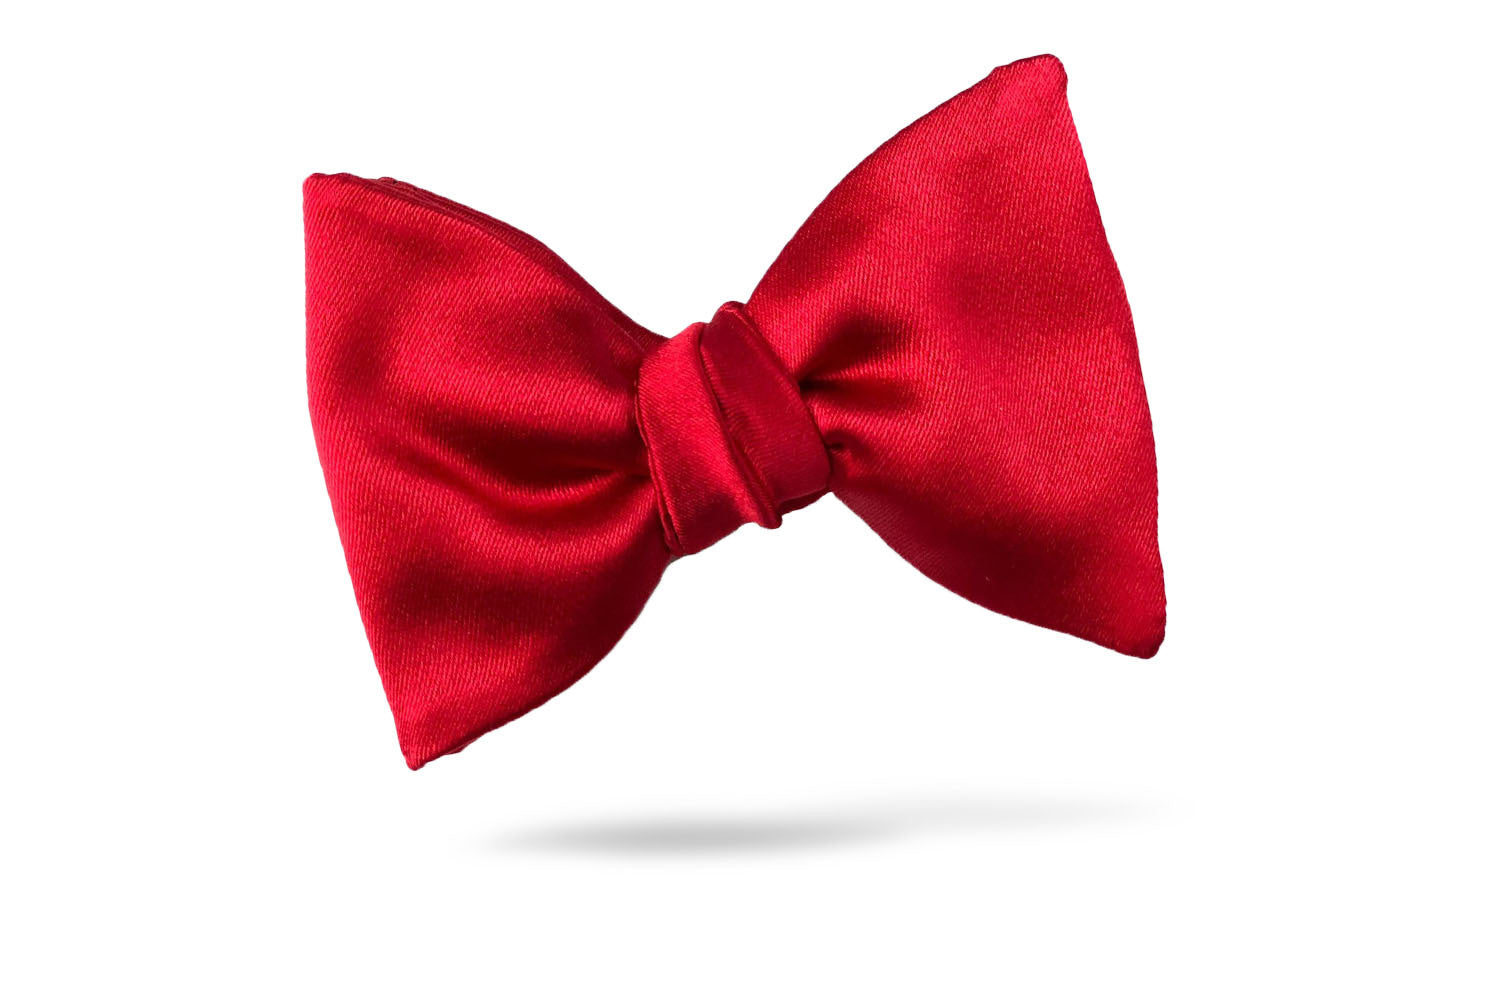 Solid Red Satin 100% Silk Bow Tie - Modena